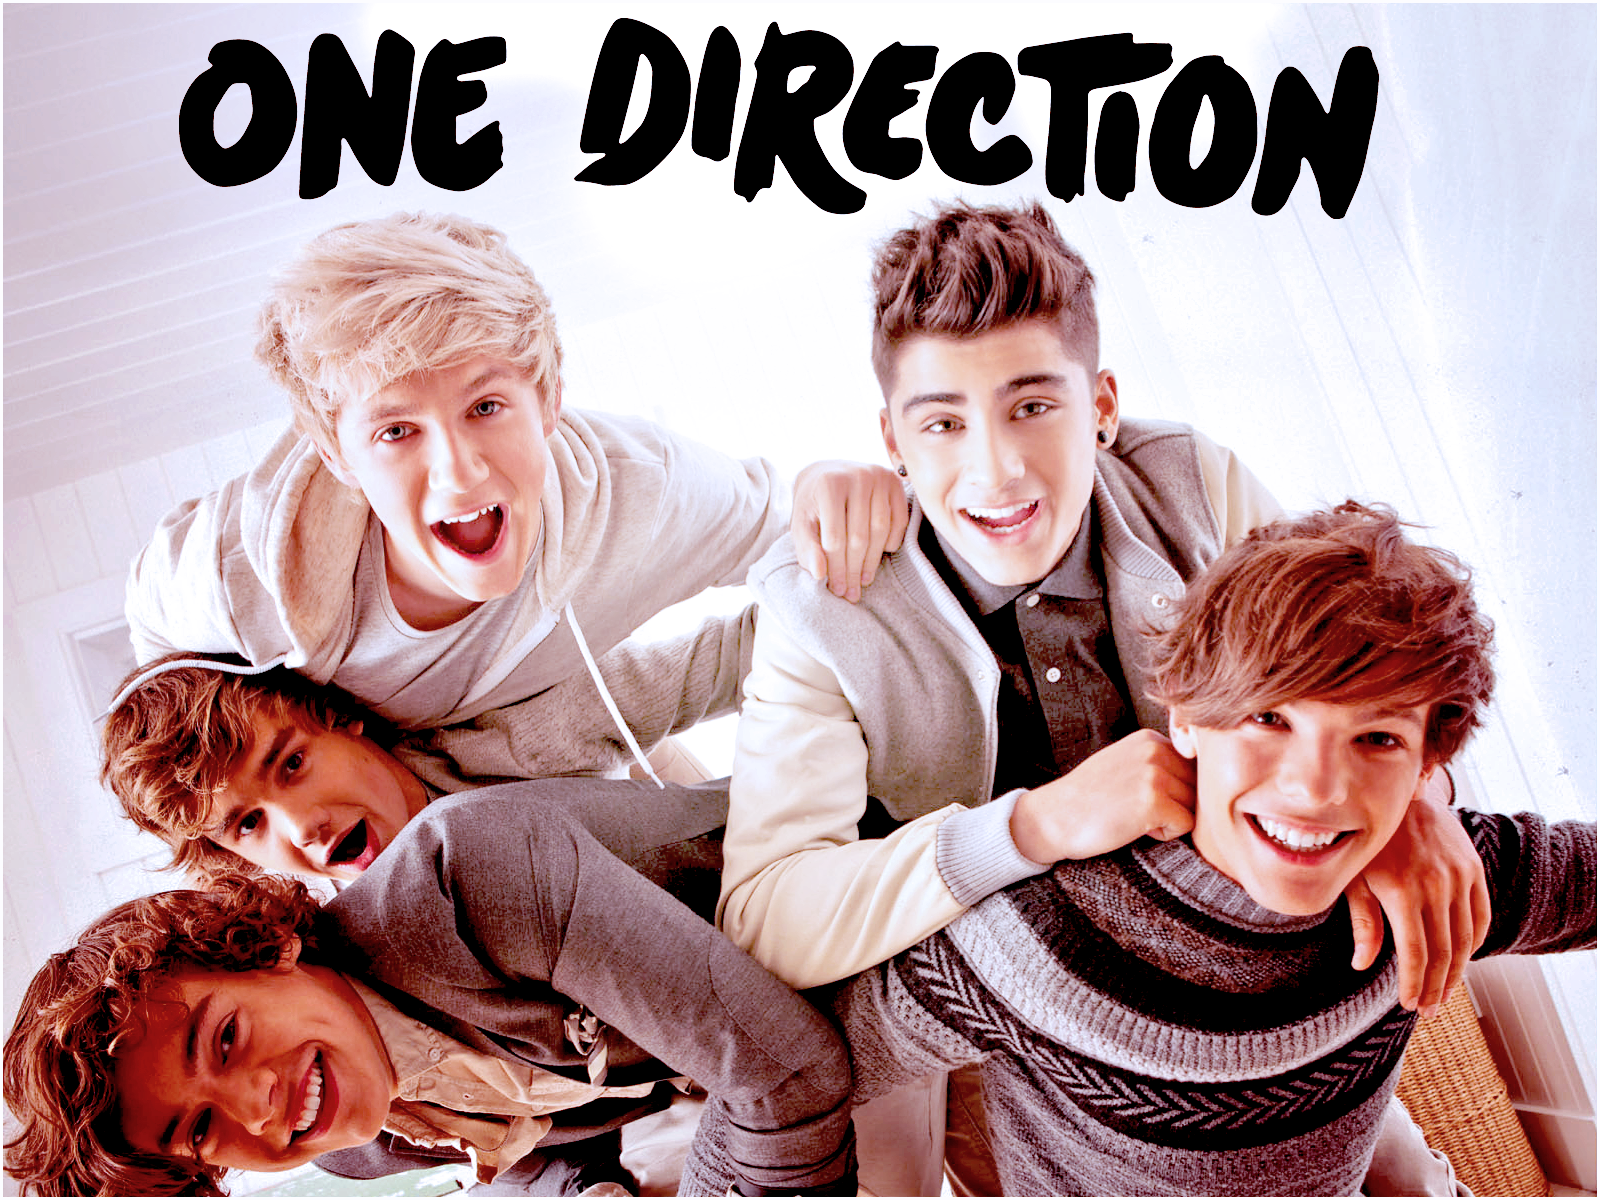 One Direction Wallpaper High Quality